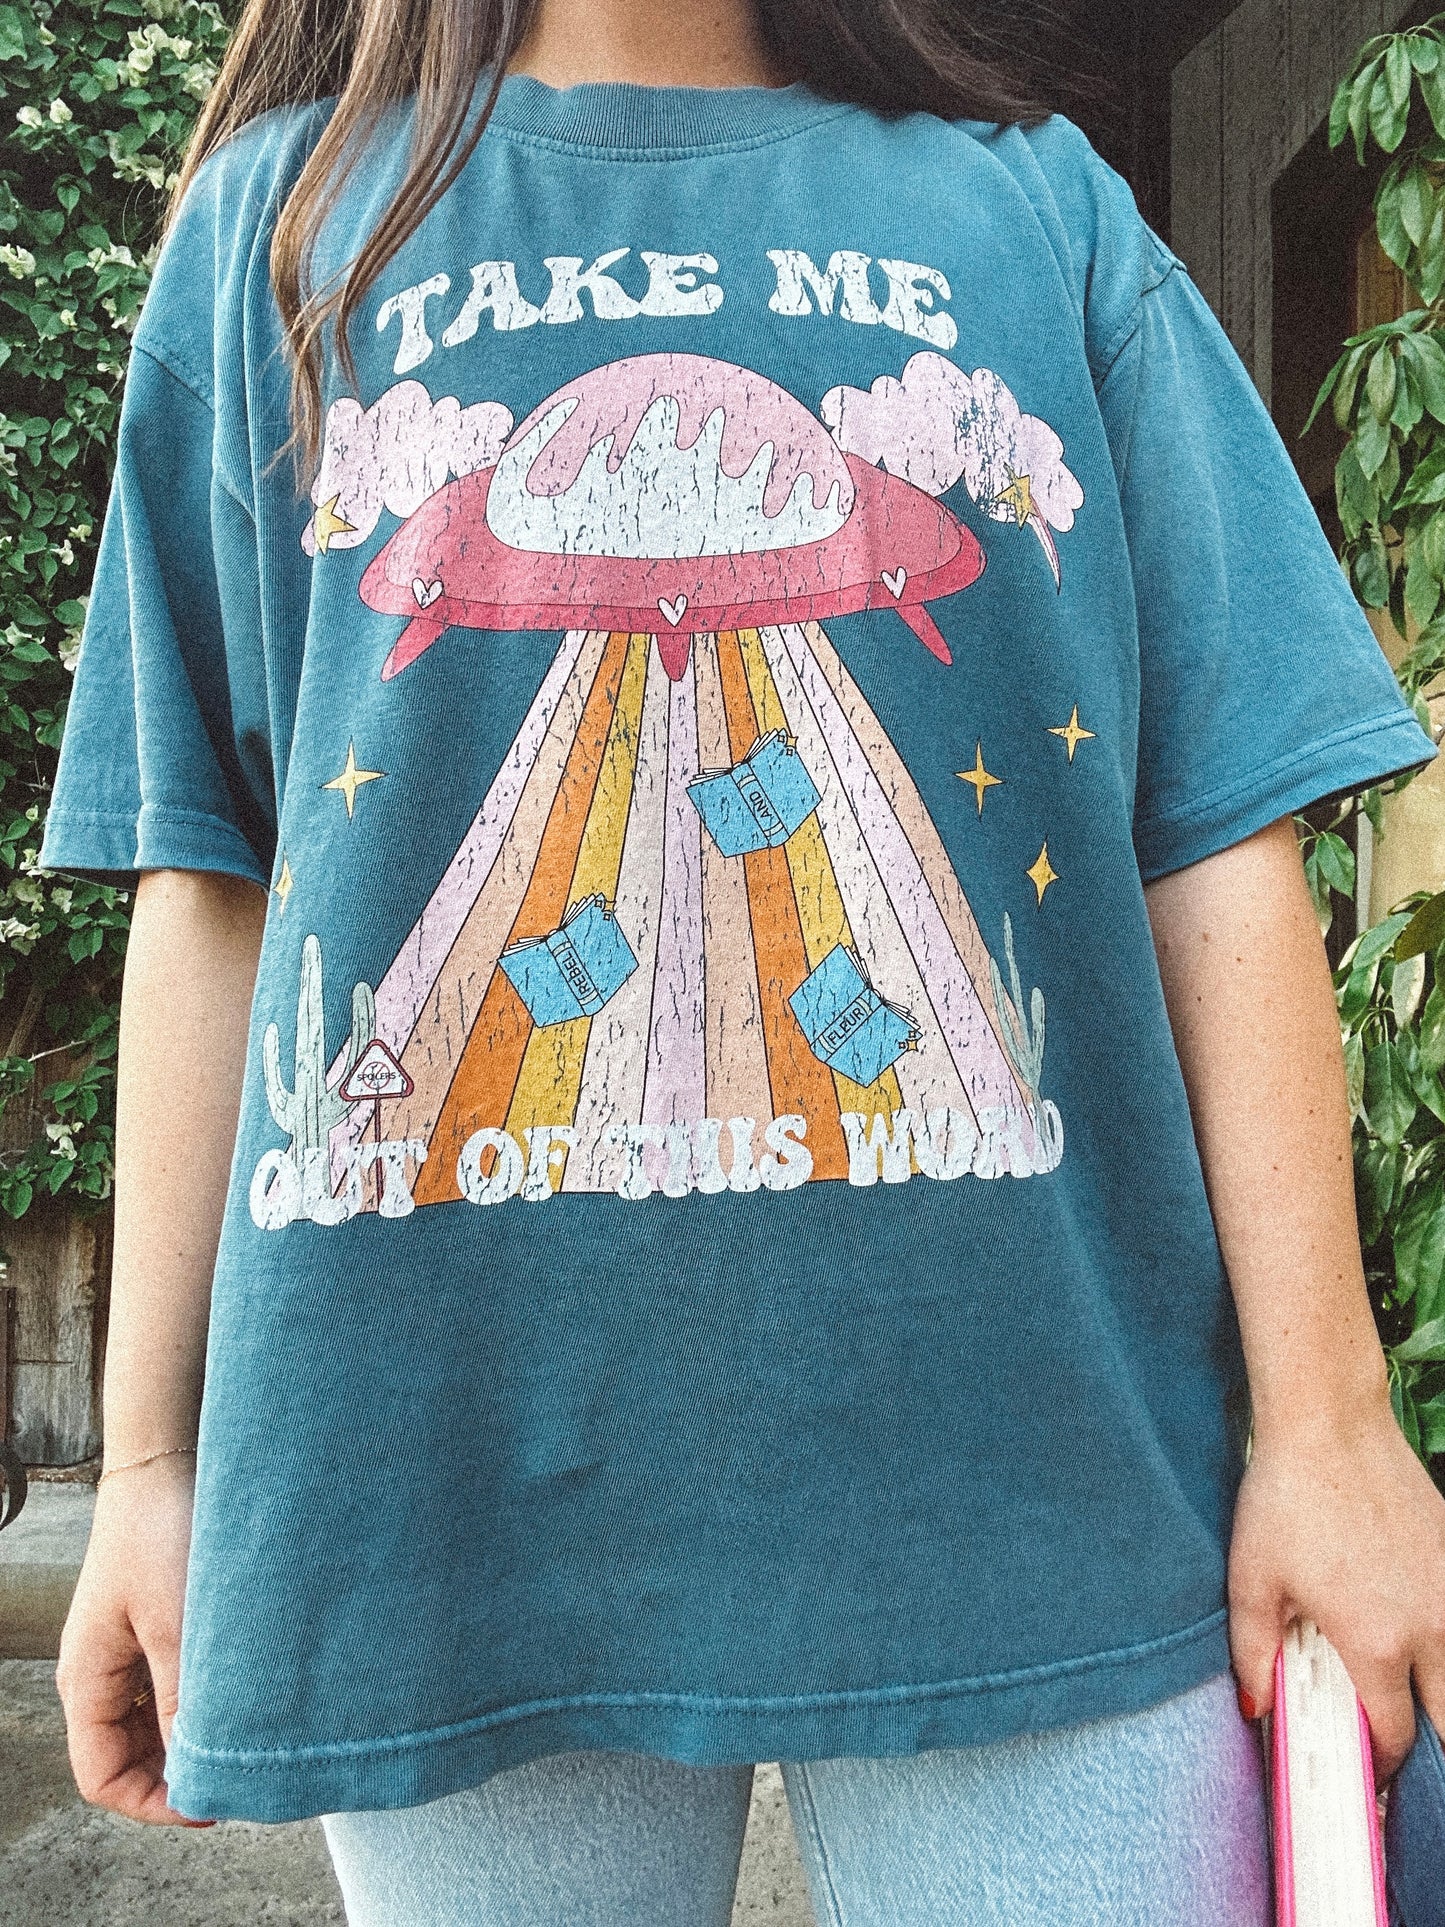 Take Me Out of this World 'Lounge' T-Shirt